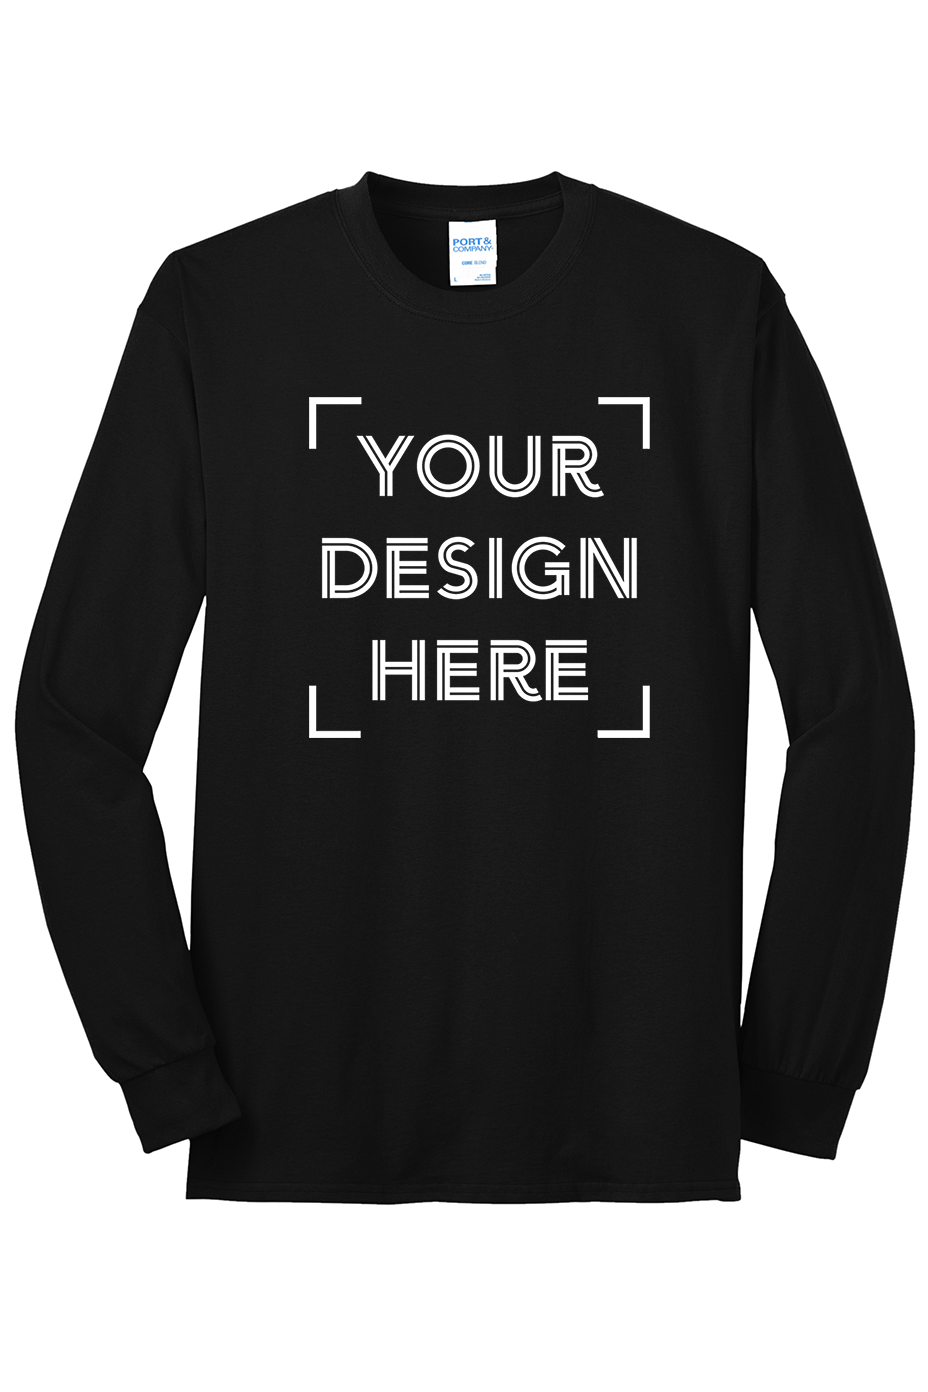 
                  
                    Port & Company® - Long Sleeve Core Blend Tee - PC55LS - FULL COLOR PRINT - MINIMUM OF 24 (Upload Your Own Design)
                  
                